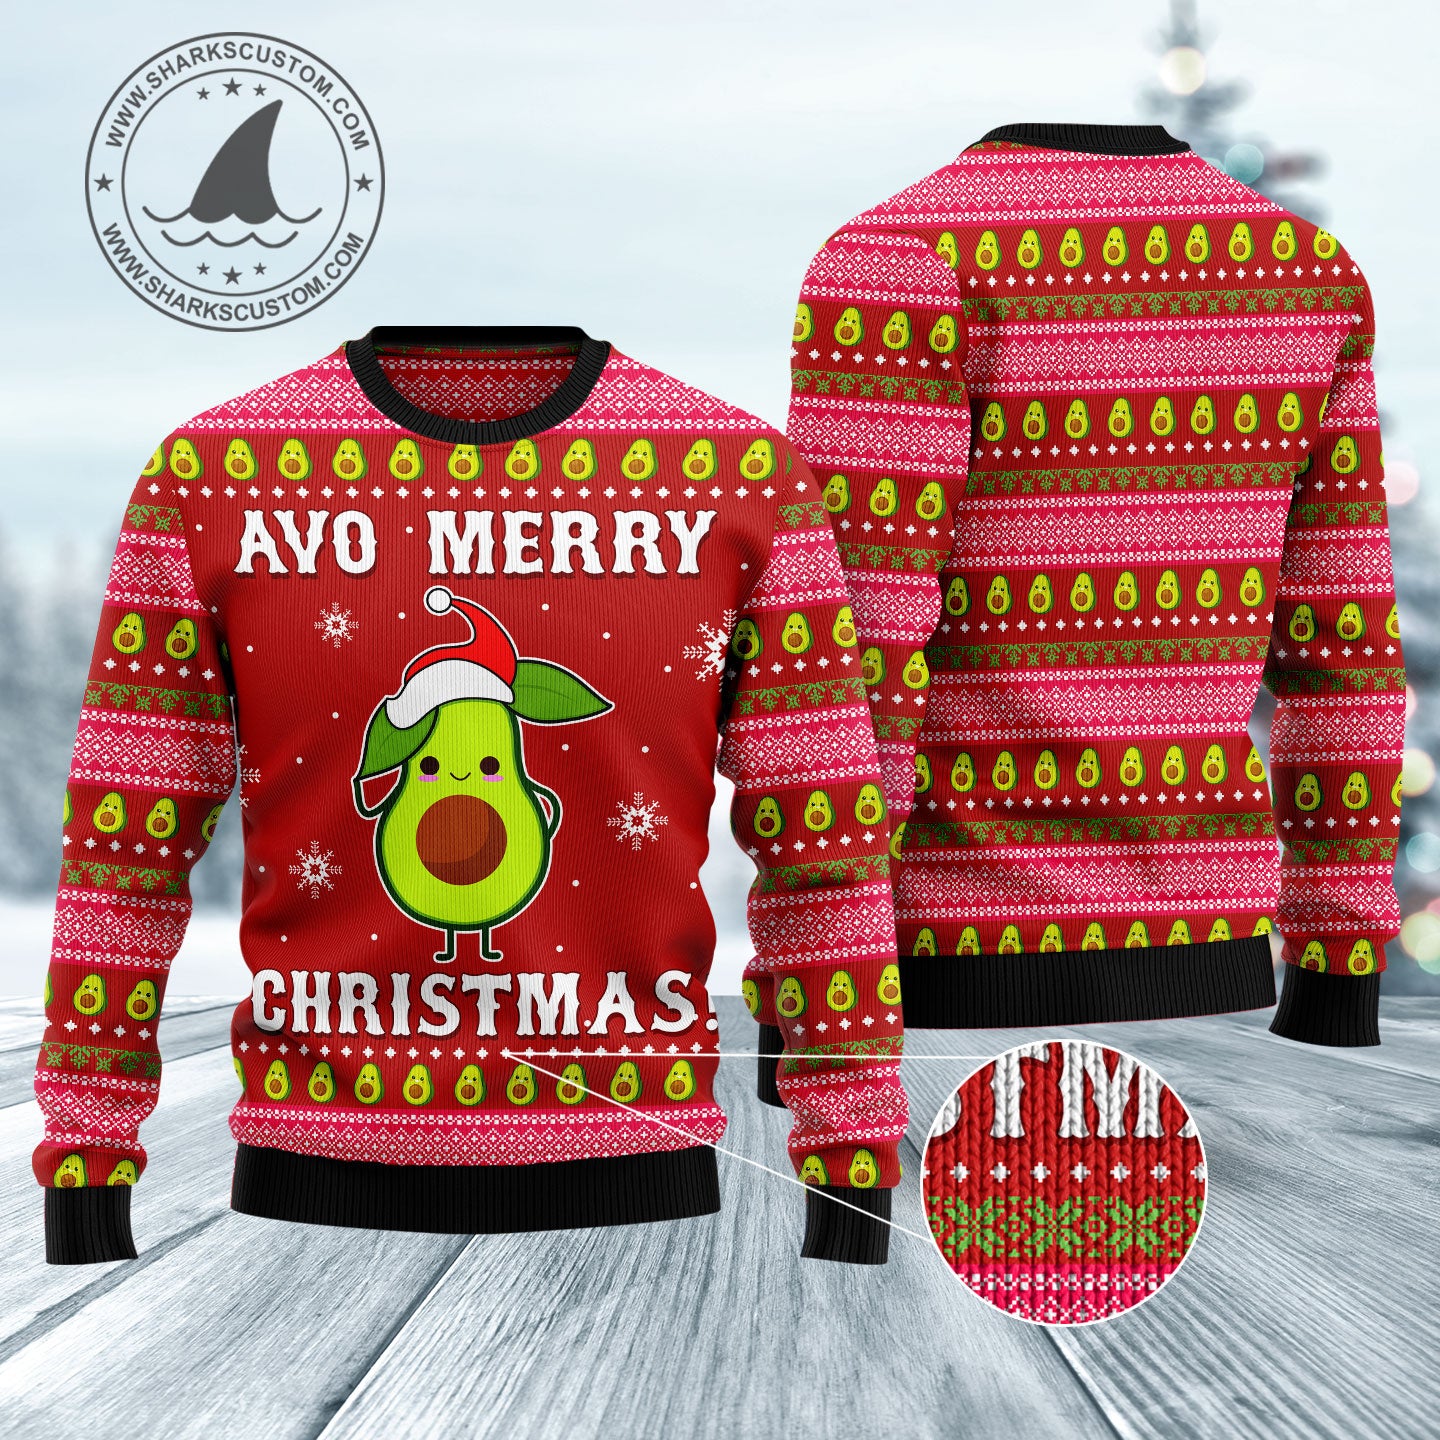 Avo Merry Christmas HZ102302 Ugly Christmas Sweater unisex womens & mens, couples matching, friends, funny family sweater gifts (plus size available)